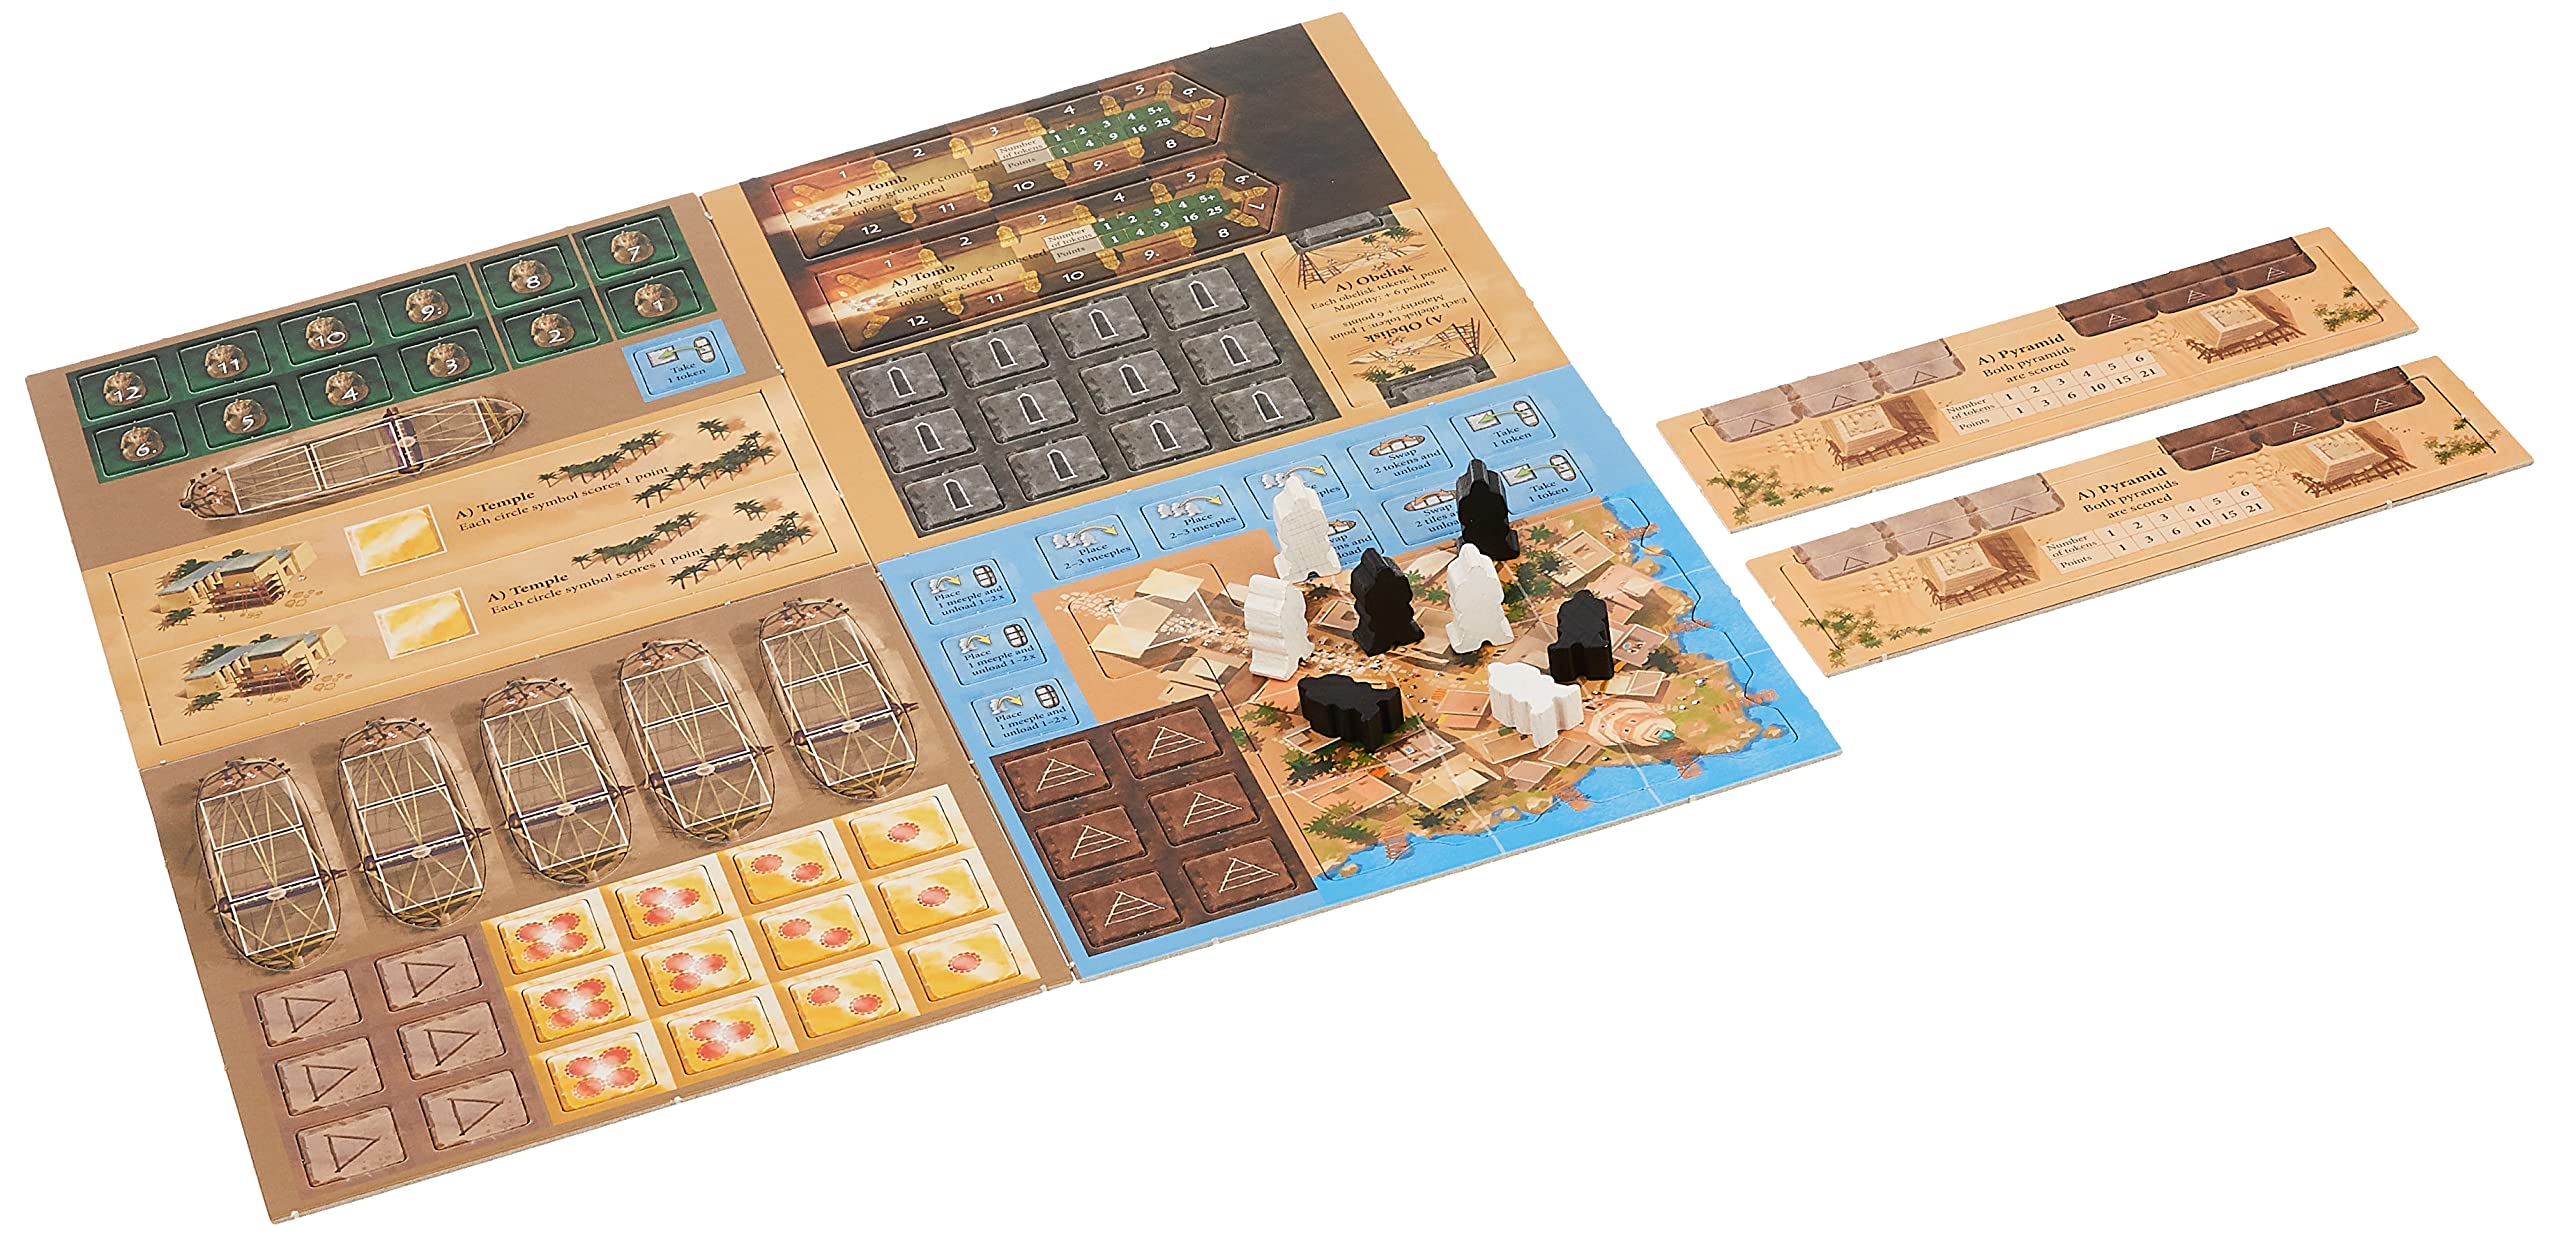 Thames & Kosmos Imhotep: The Duel 2-Player Version of Spiel Des Jahres-Nominated Imhotep, Builder of Egypt Board Game